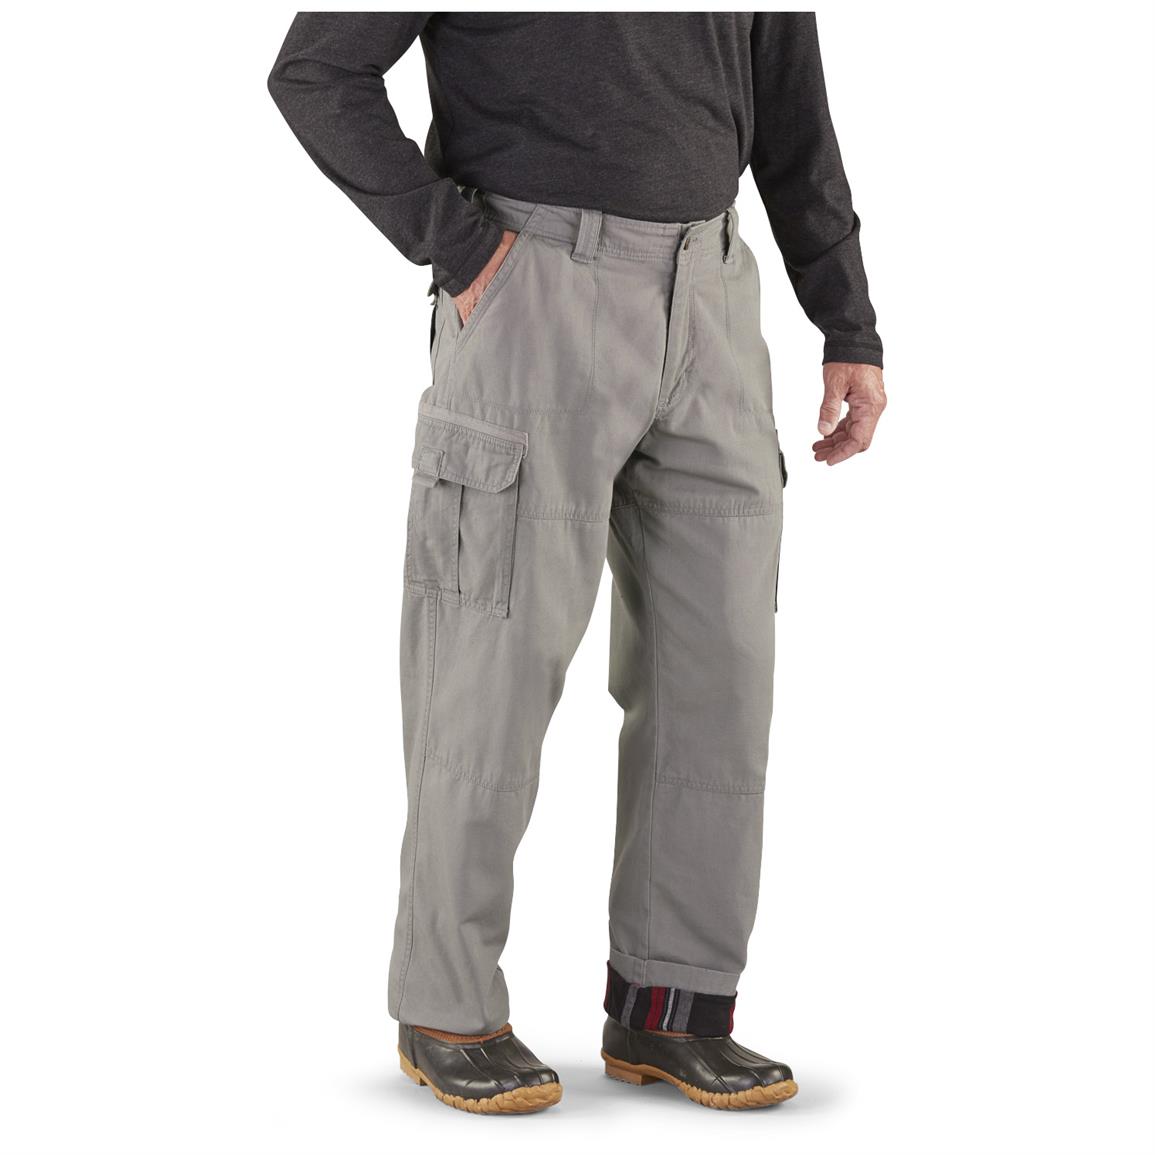 Guide Gear Men's Cargo Pants, Flannel Lined - 224165, Insulated Pants ...